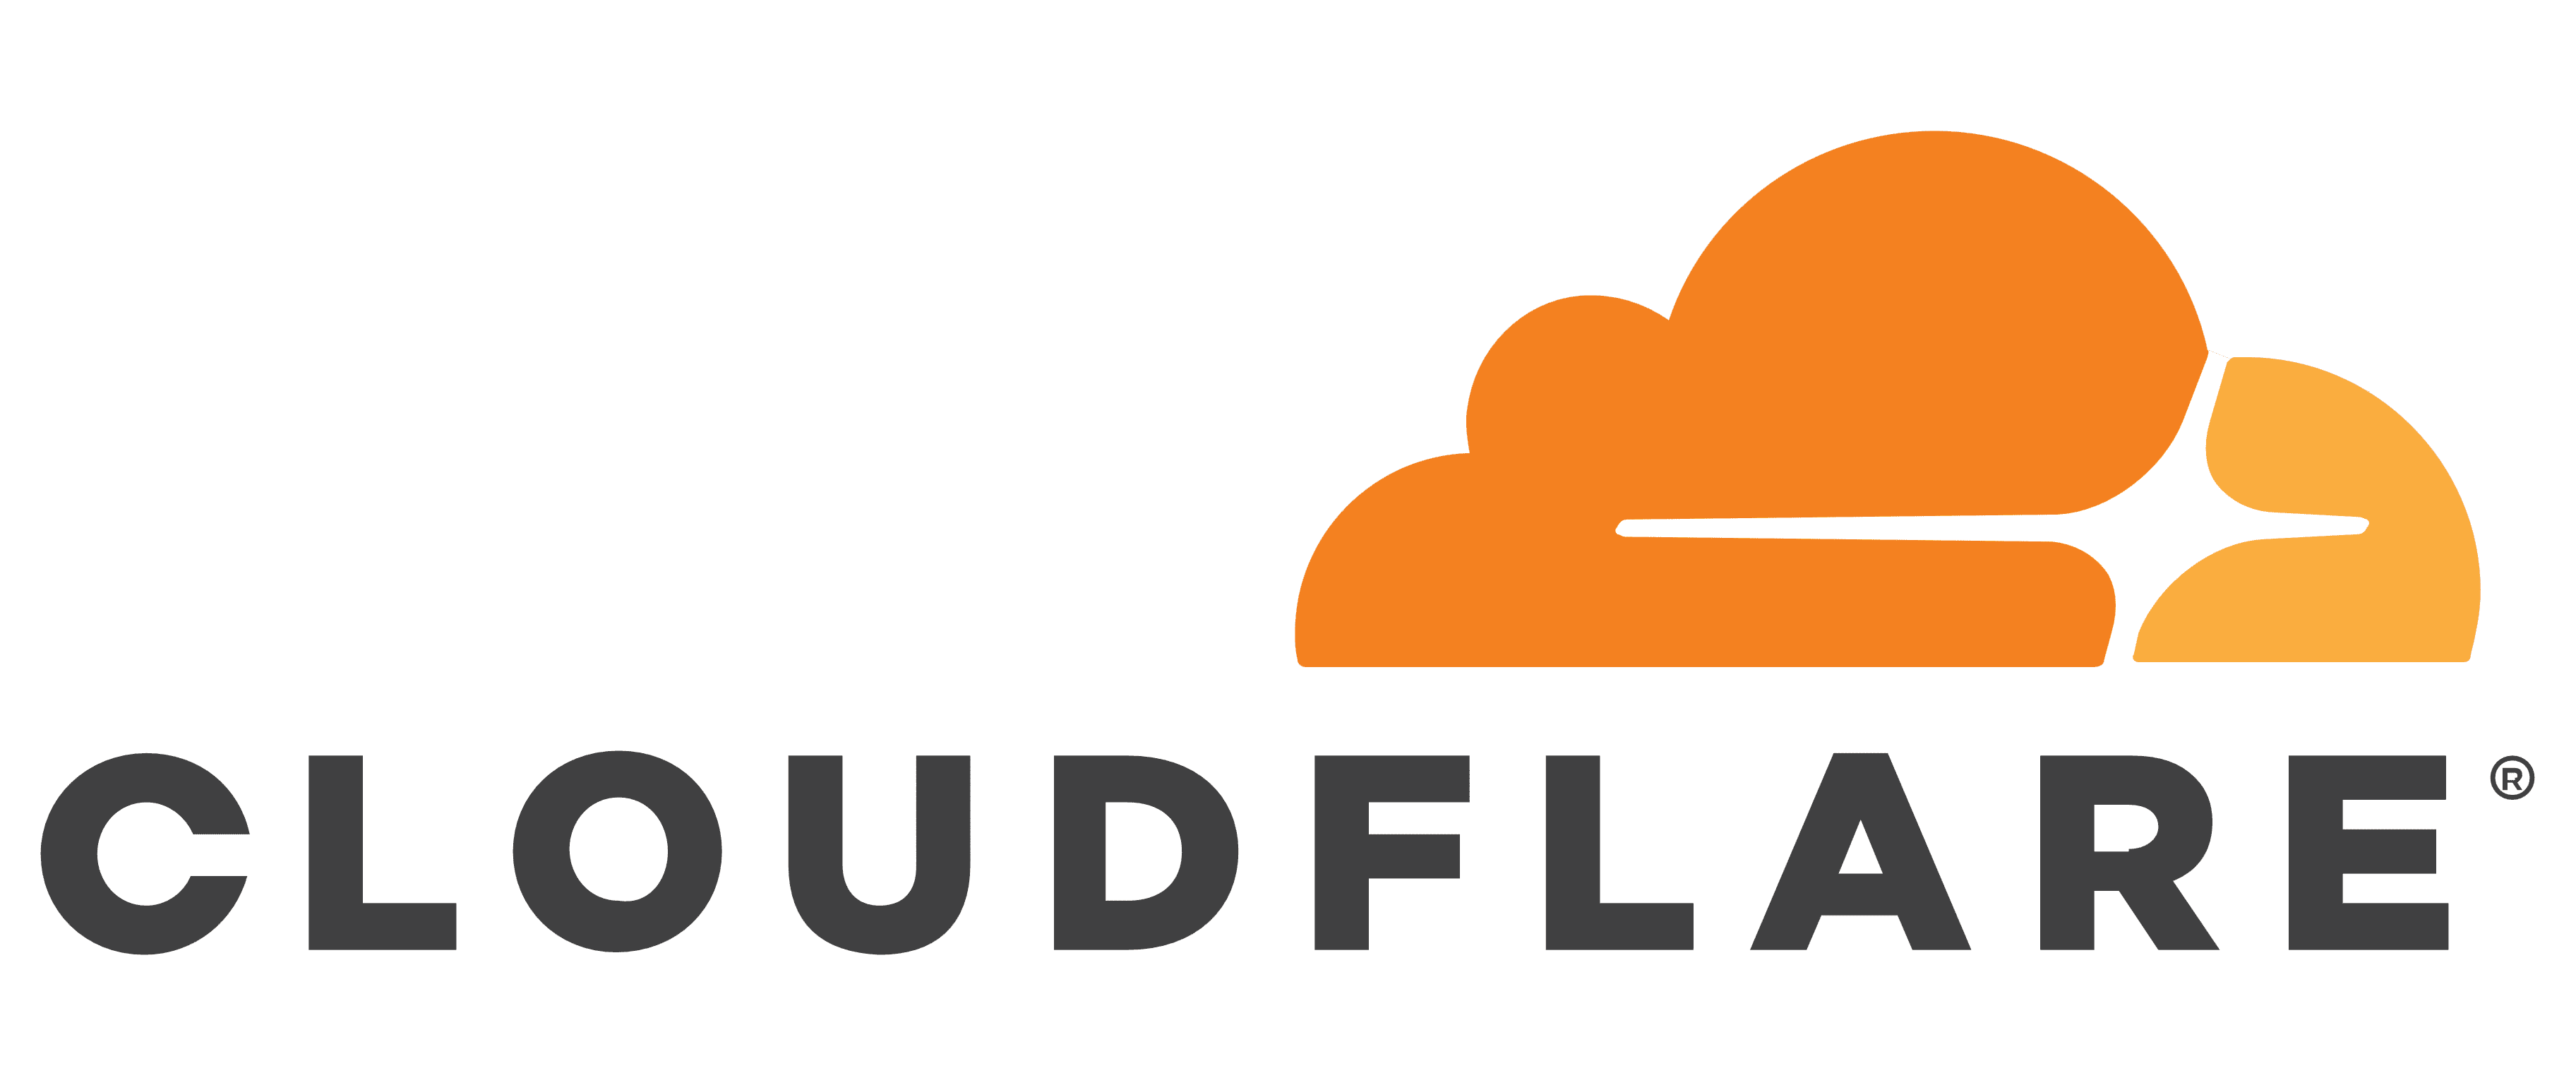 Protegemos Cloudflare con Cloudflare One
